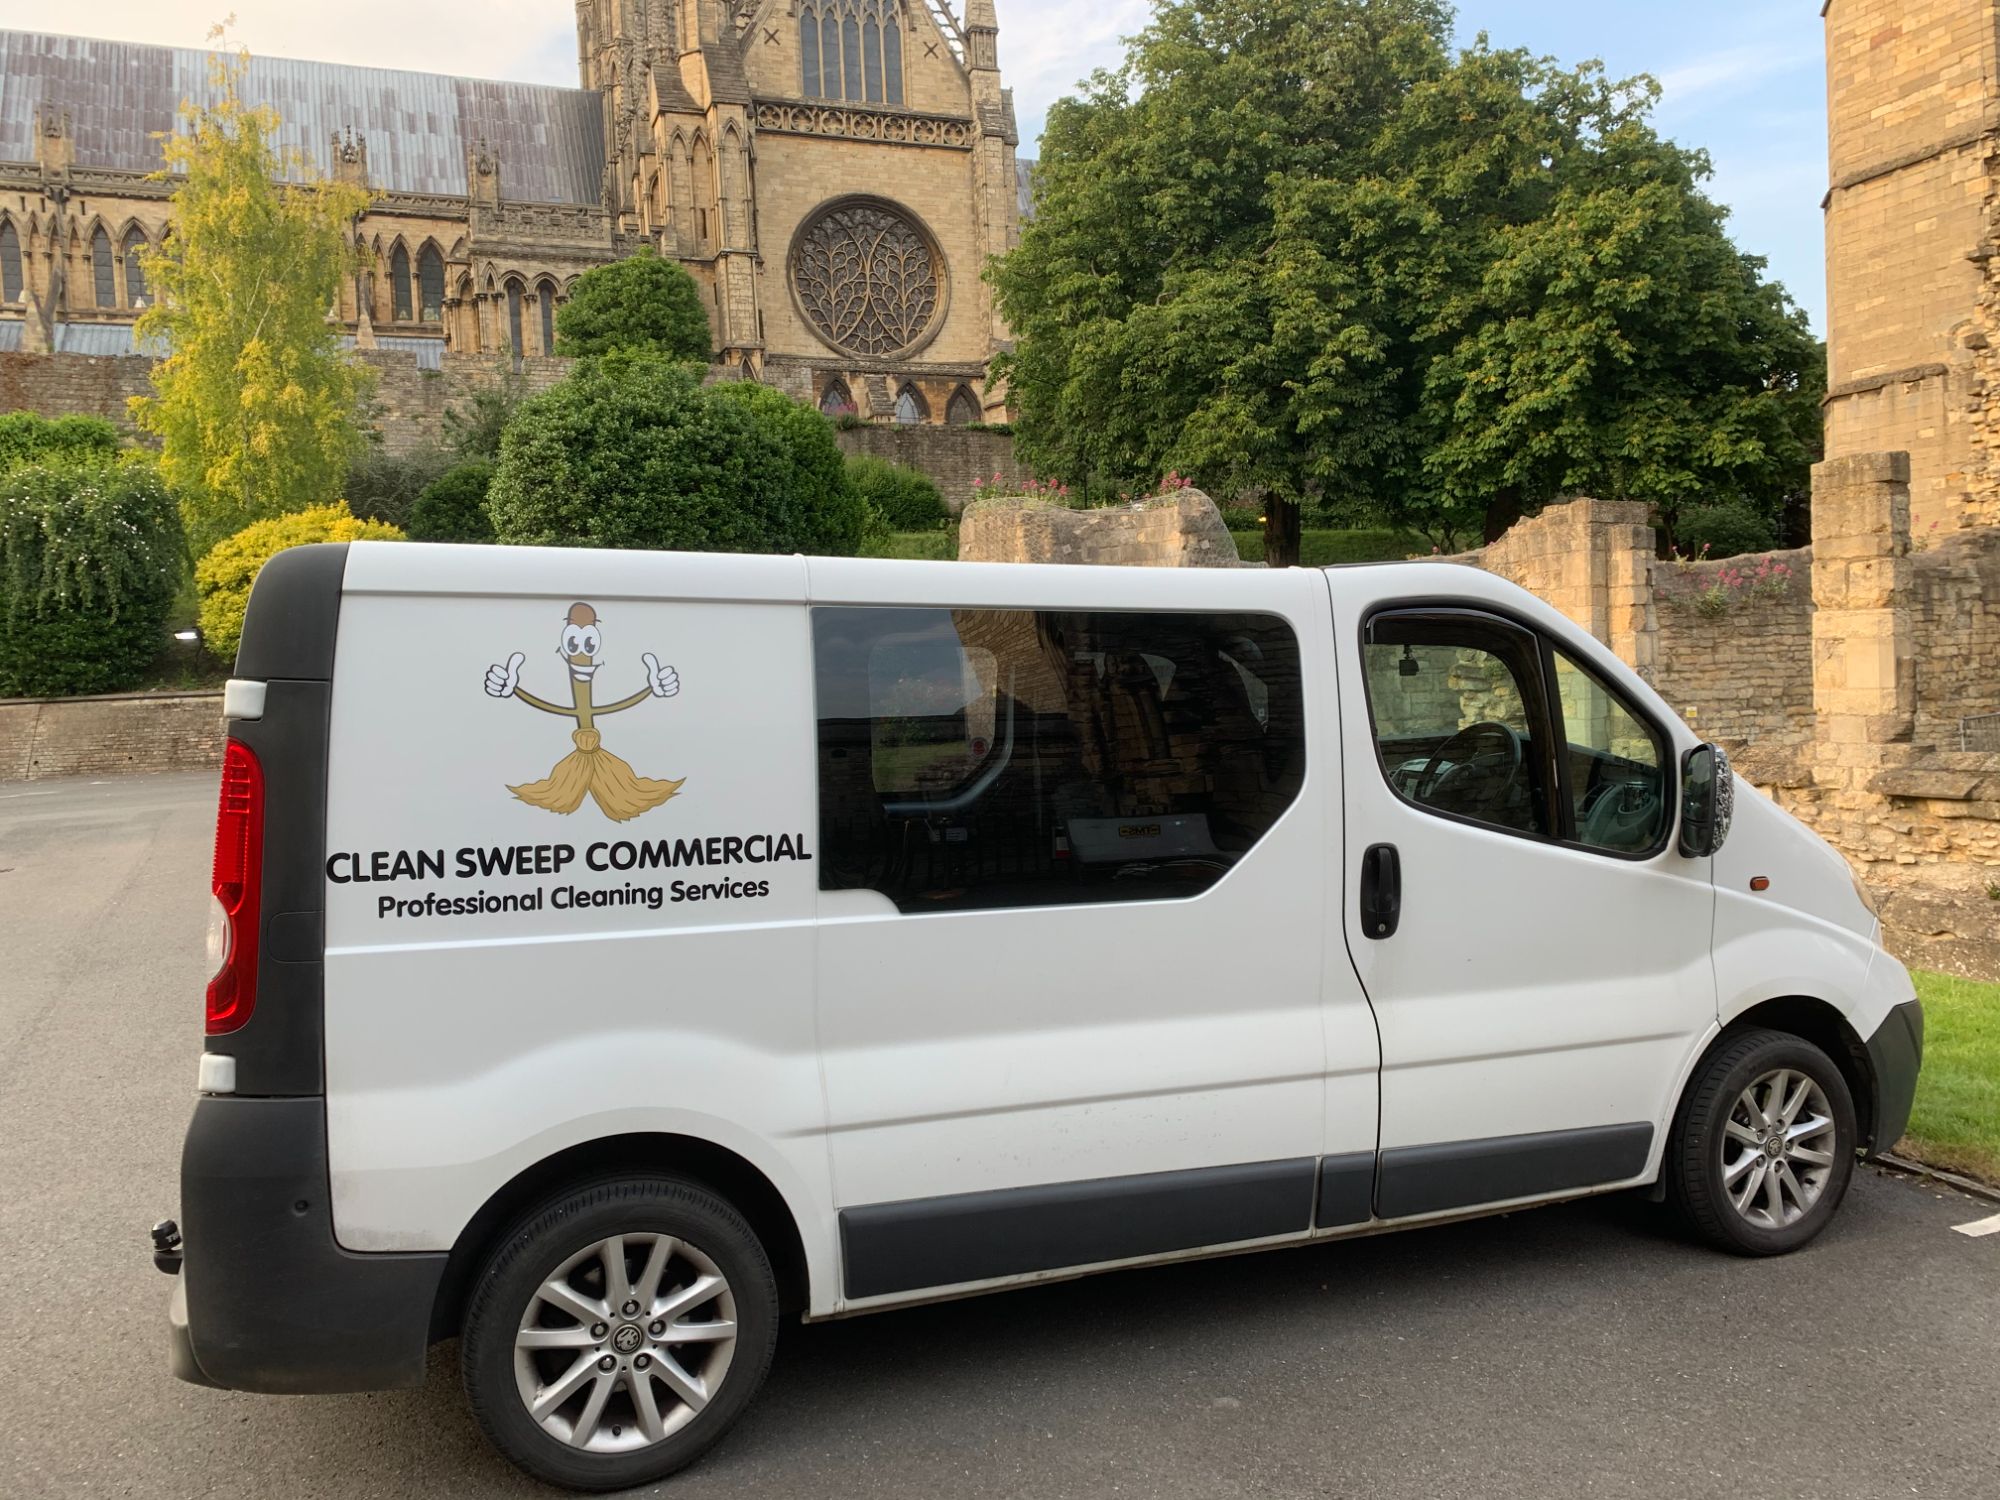 clean-sweep-commercial-van-outside-lincoln-cathedral 